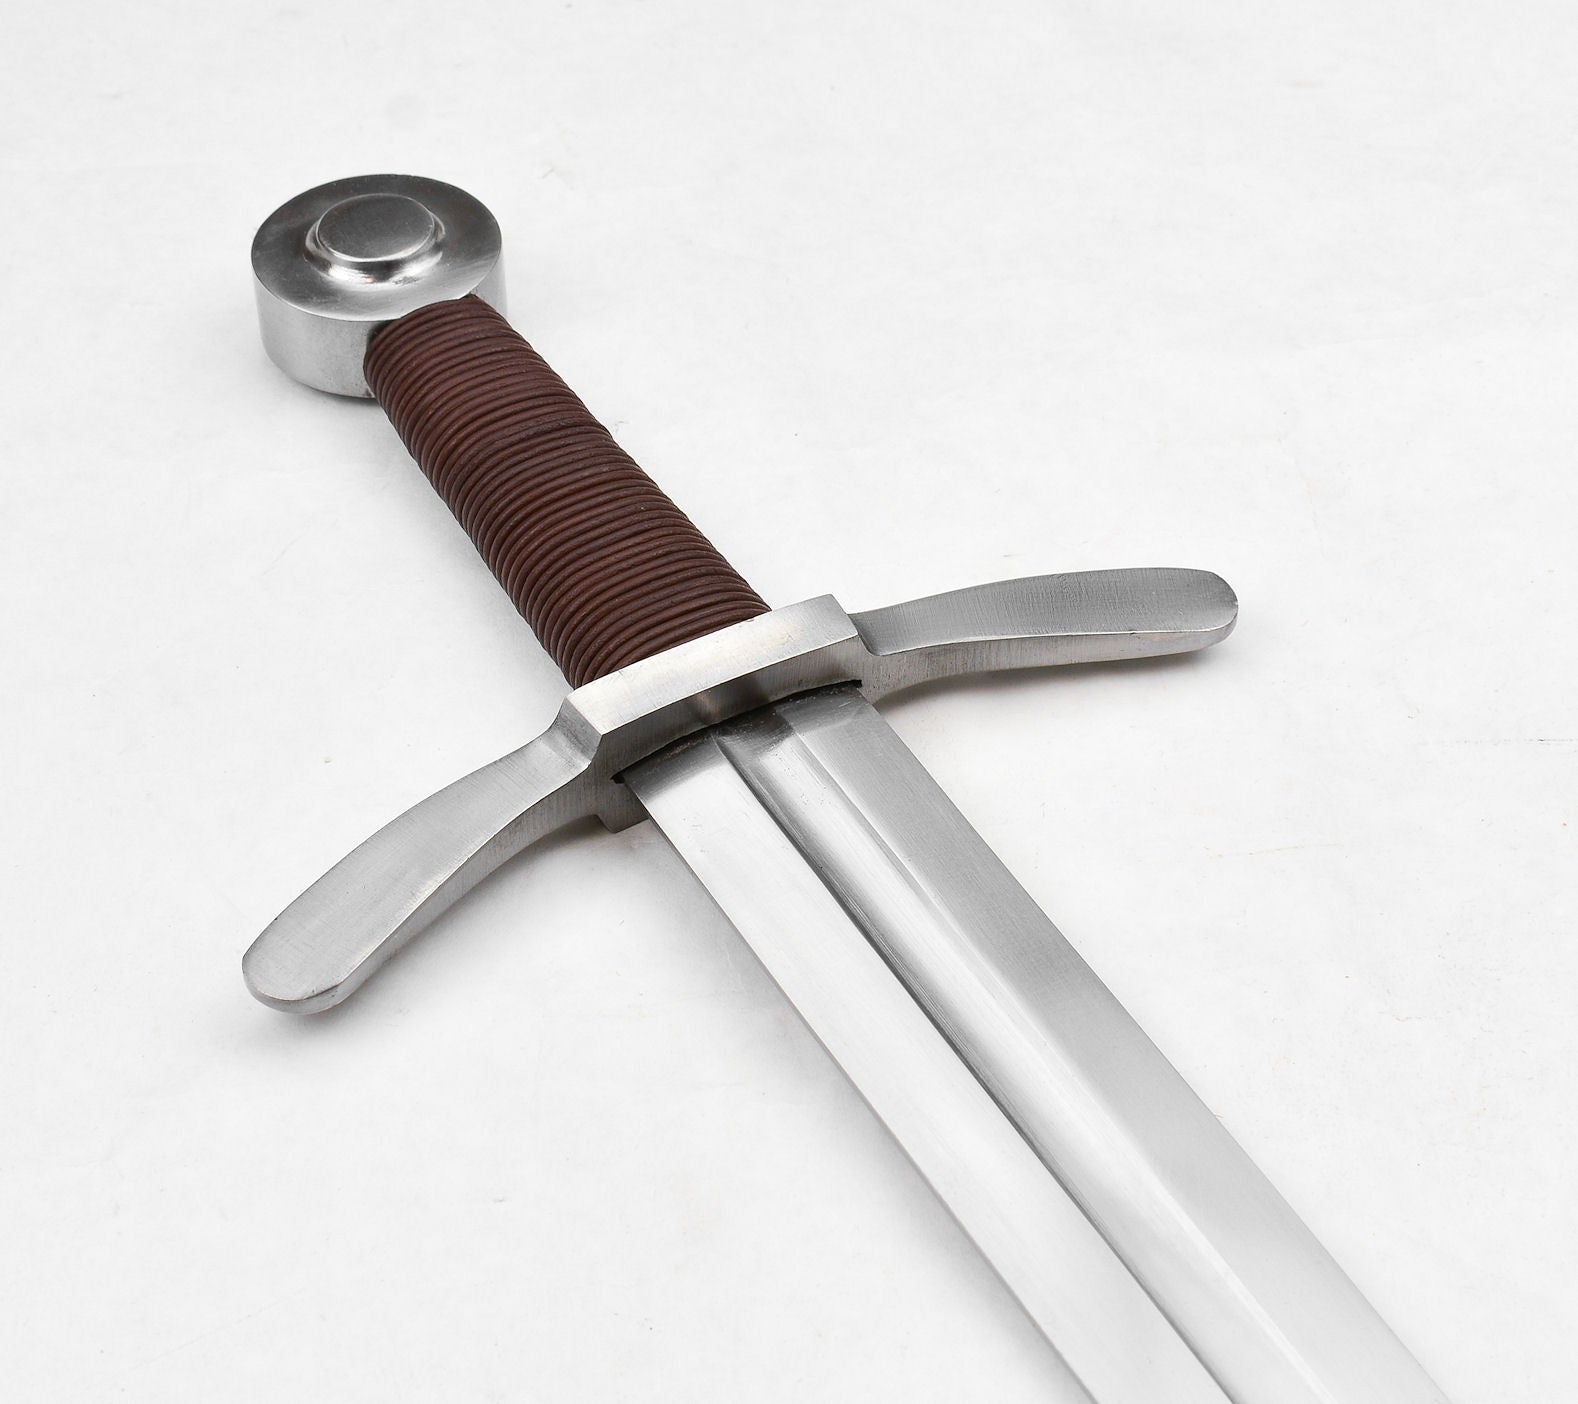 Late Medieval Arming Sword - Stage Combat Version by Deepeeka